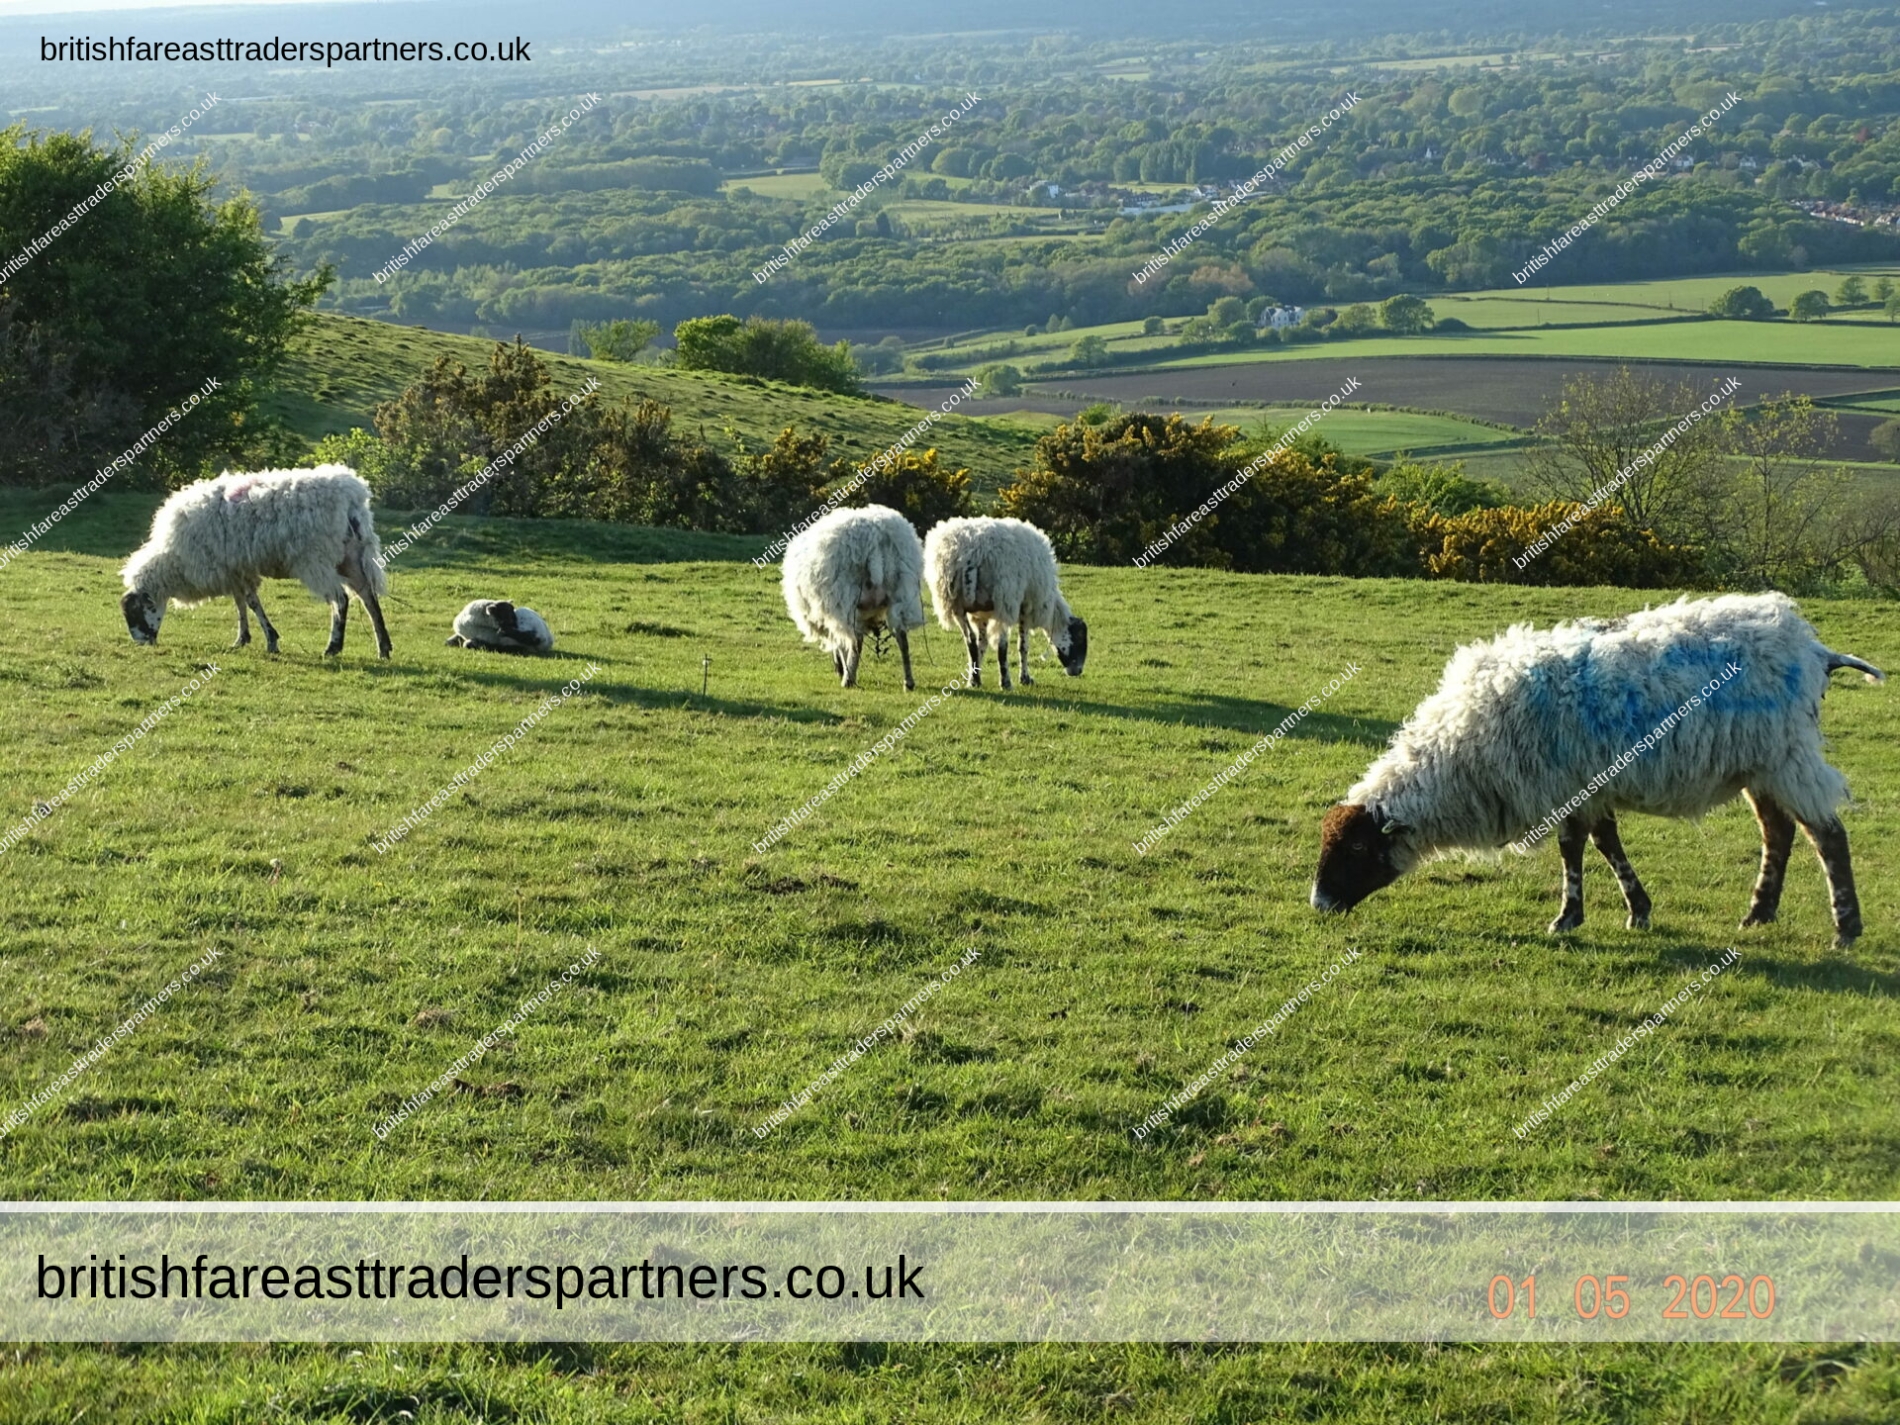 AN EVENING CLIMB IN DITCHLING BEACON, EAST SUSSEX, ENGLAND, BRITISH & FAR EAST TRADERS & PARTNERS, SHEEP, LAMB